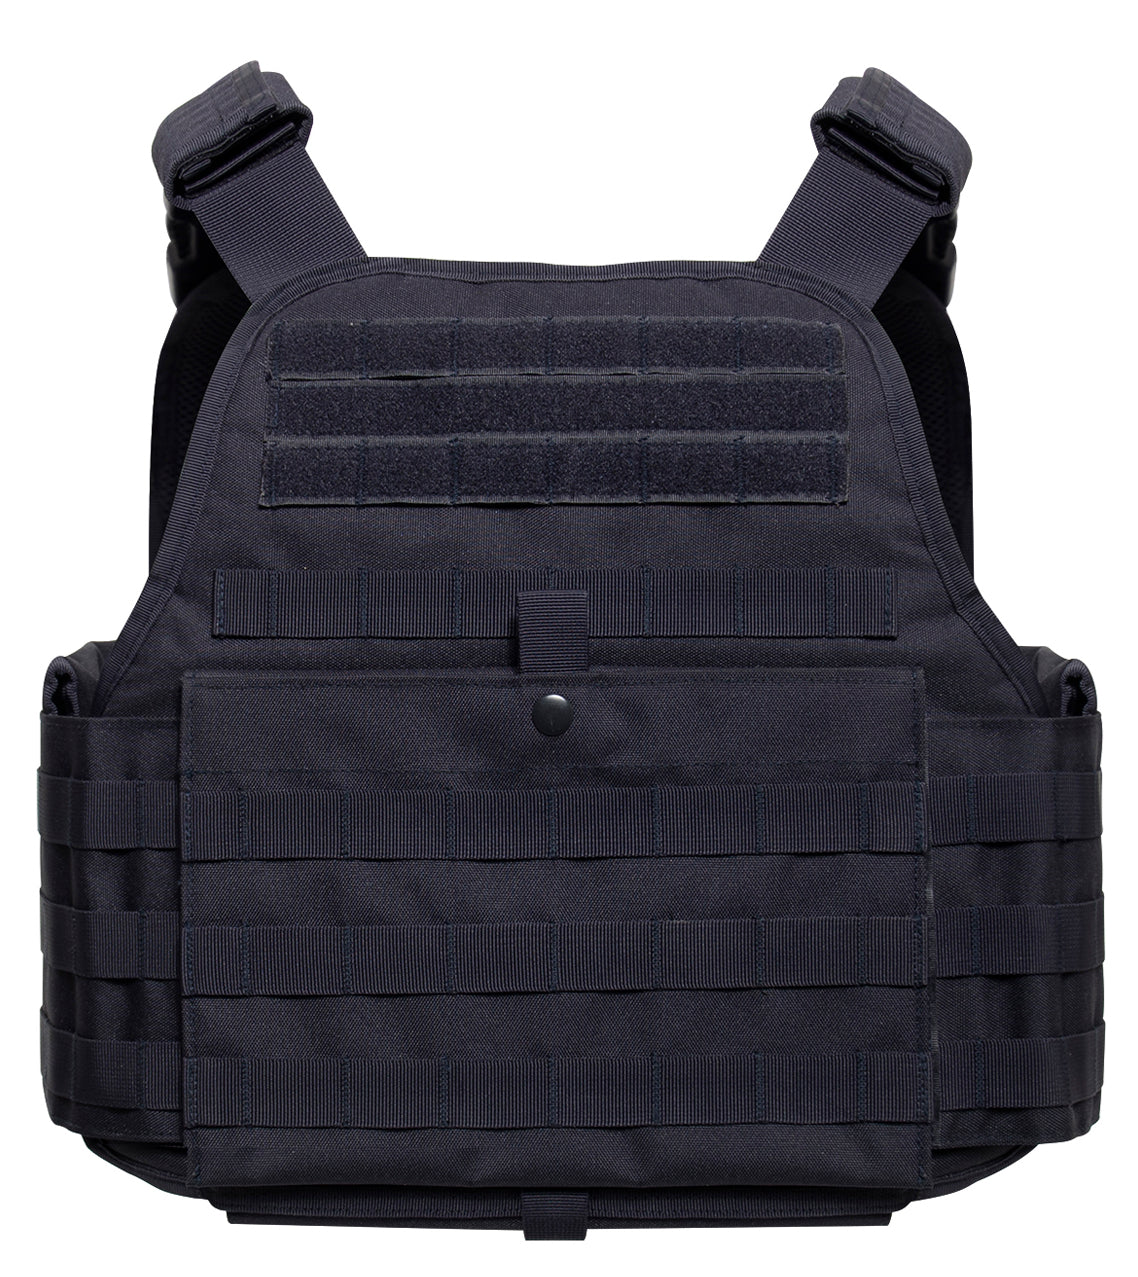 Rothco MOLLE Plate Carrier Vest Oversized Big Tall 3XL